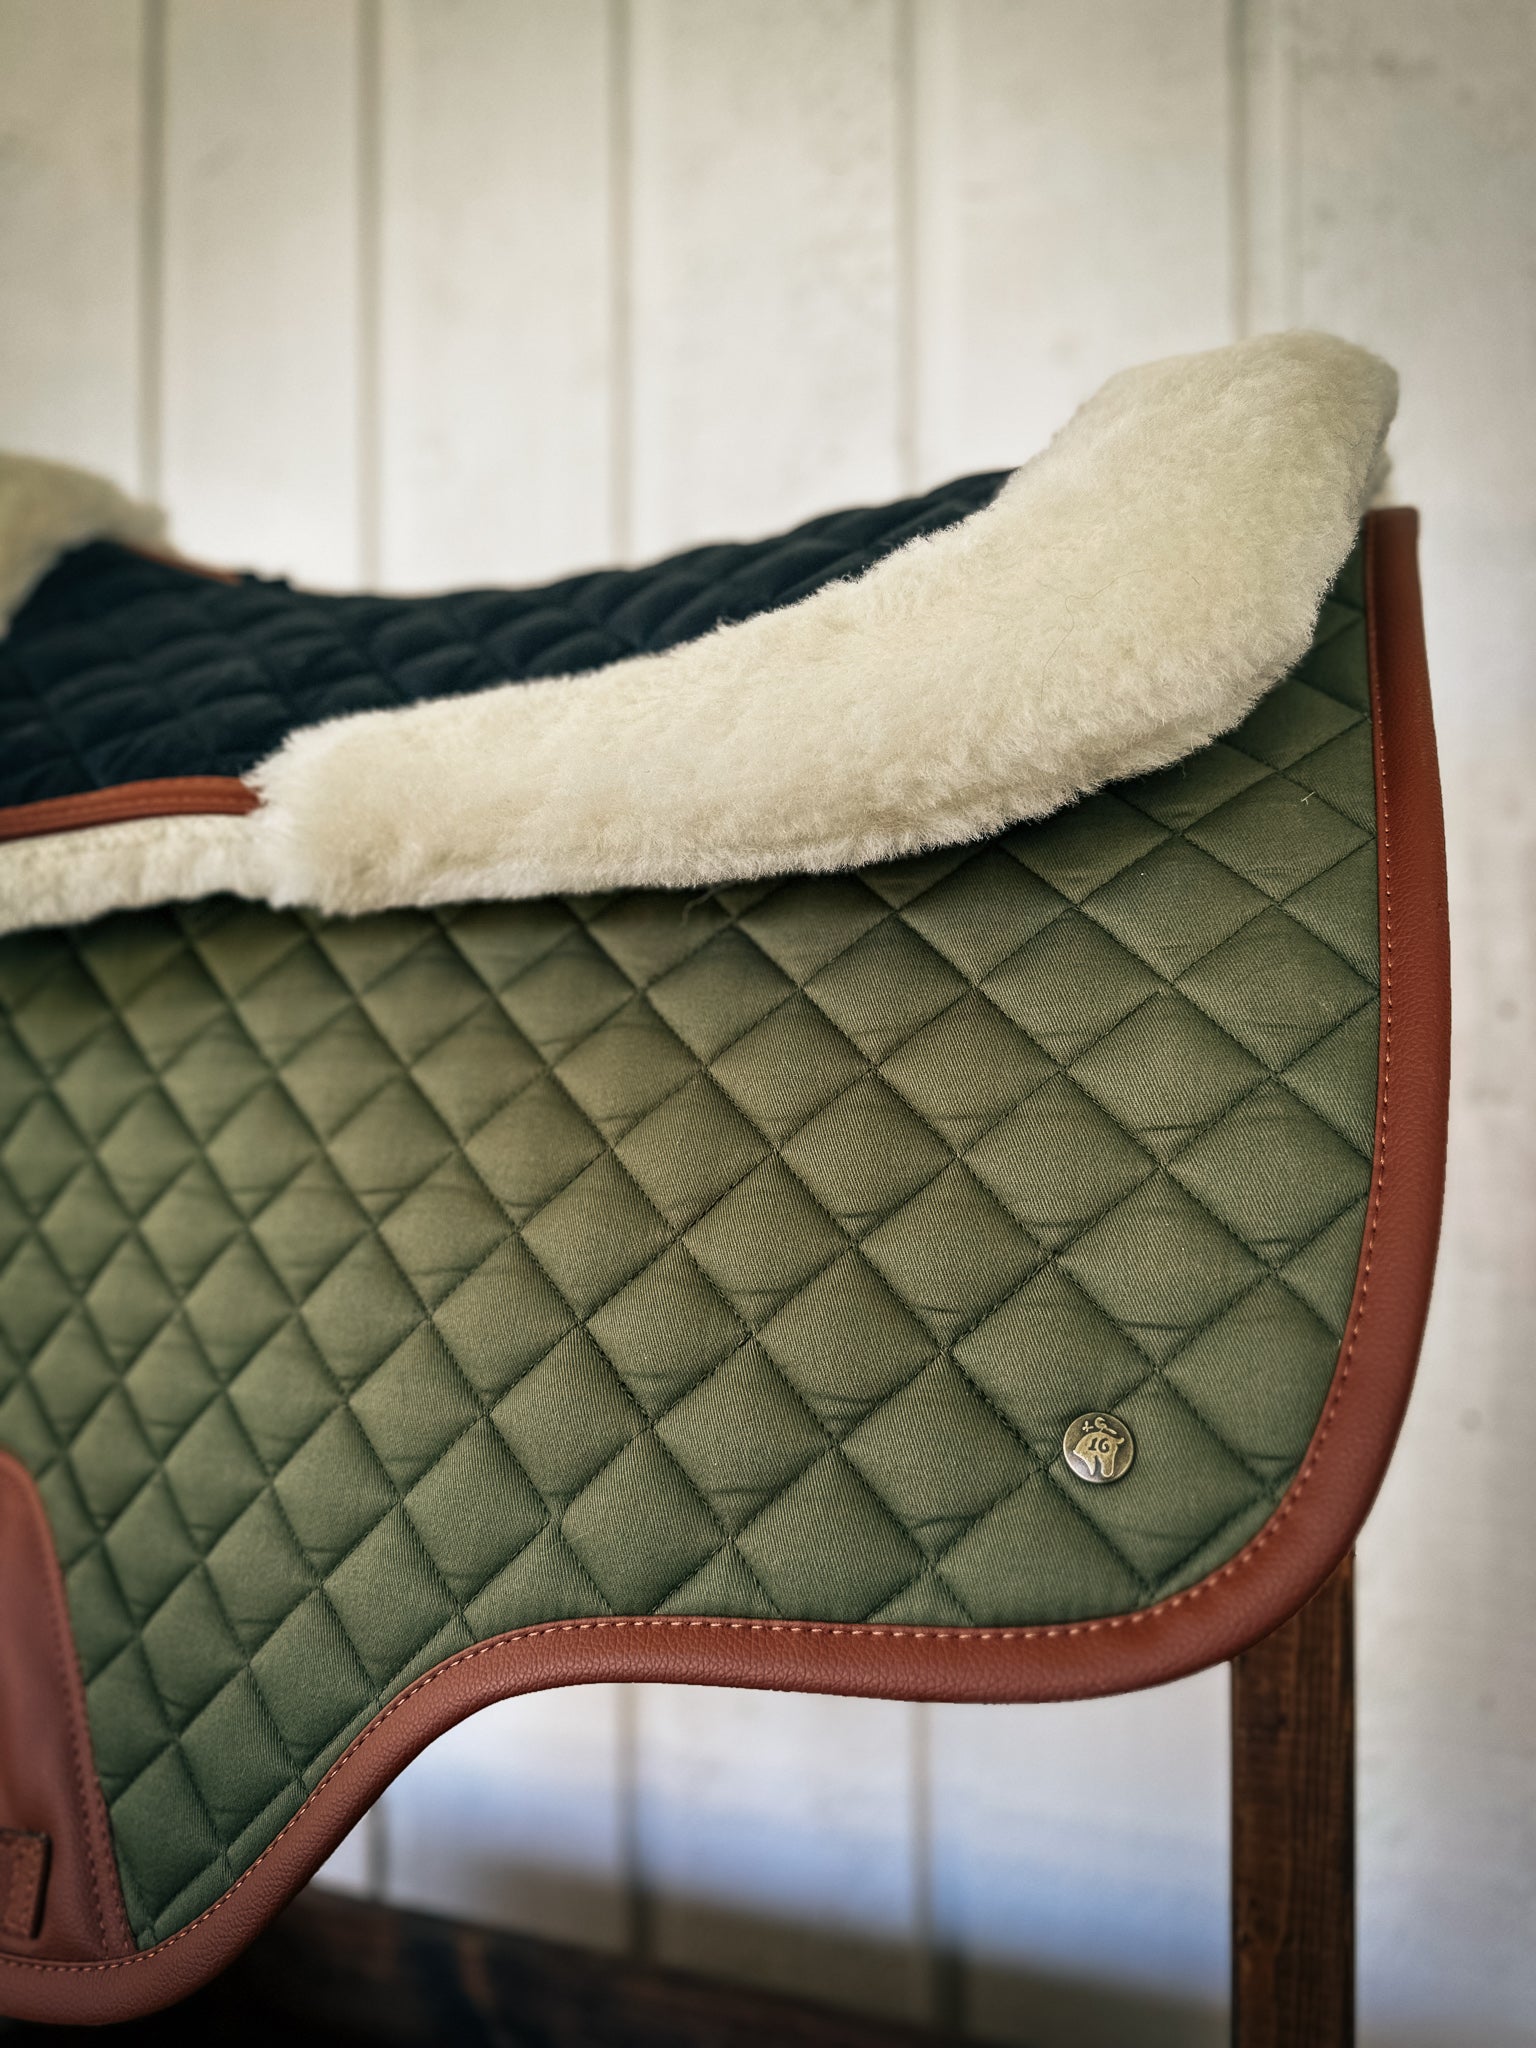 Sixteen Cypress Close Contact Pad, Olive & Cognac - Equiluxe Tack